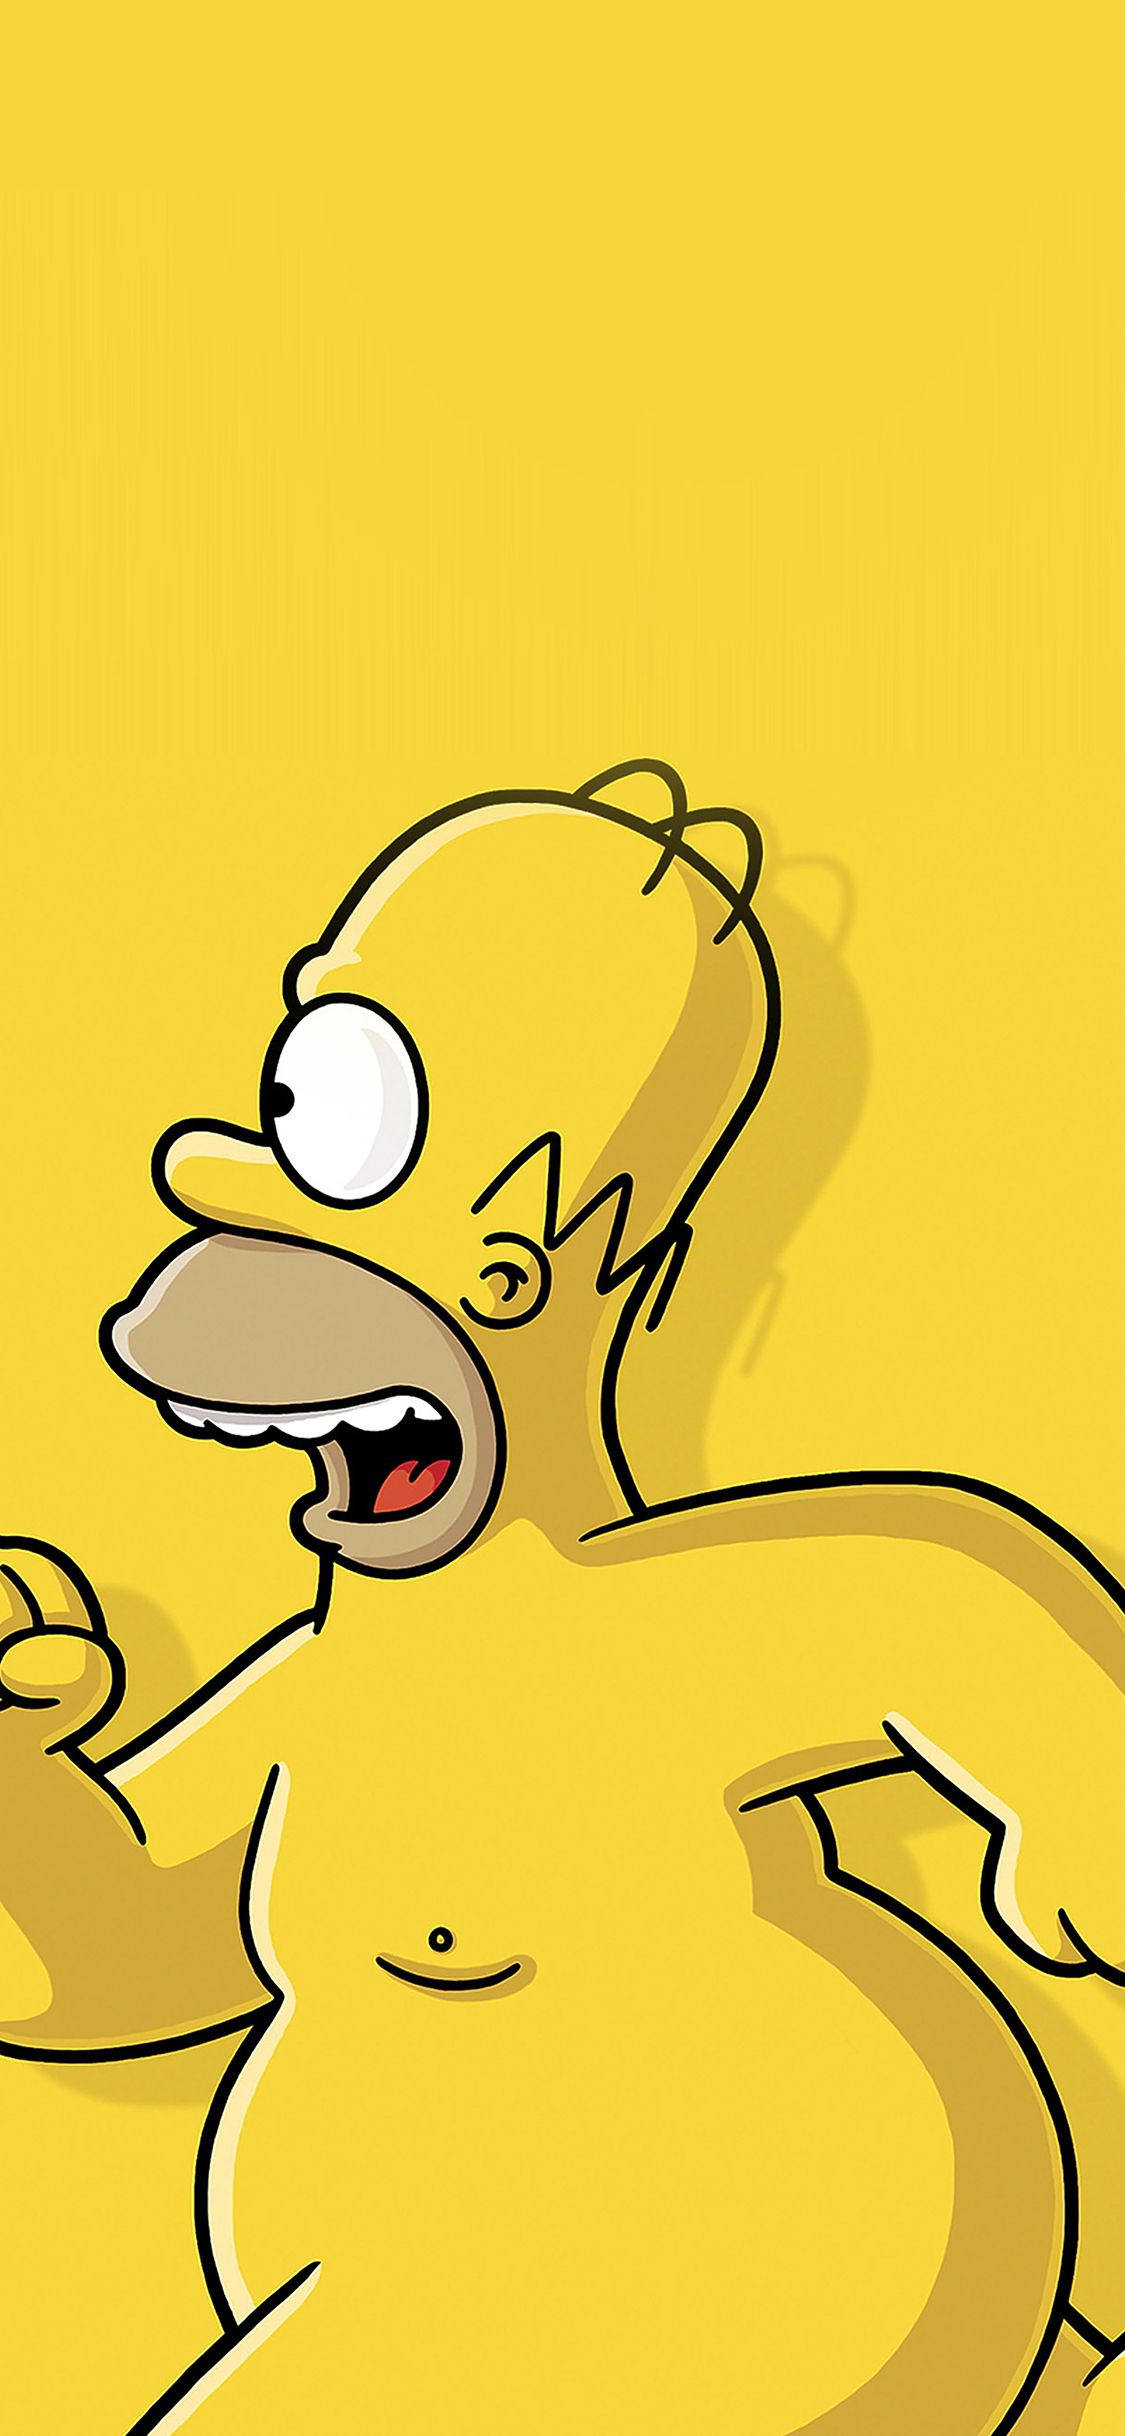 Homer Simpson on a yellow background - Homer Simpson